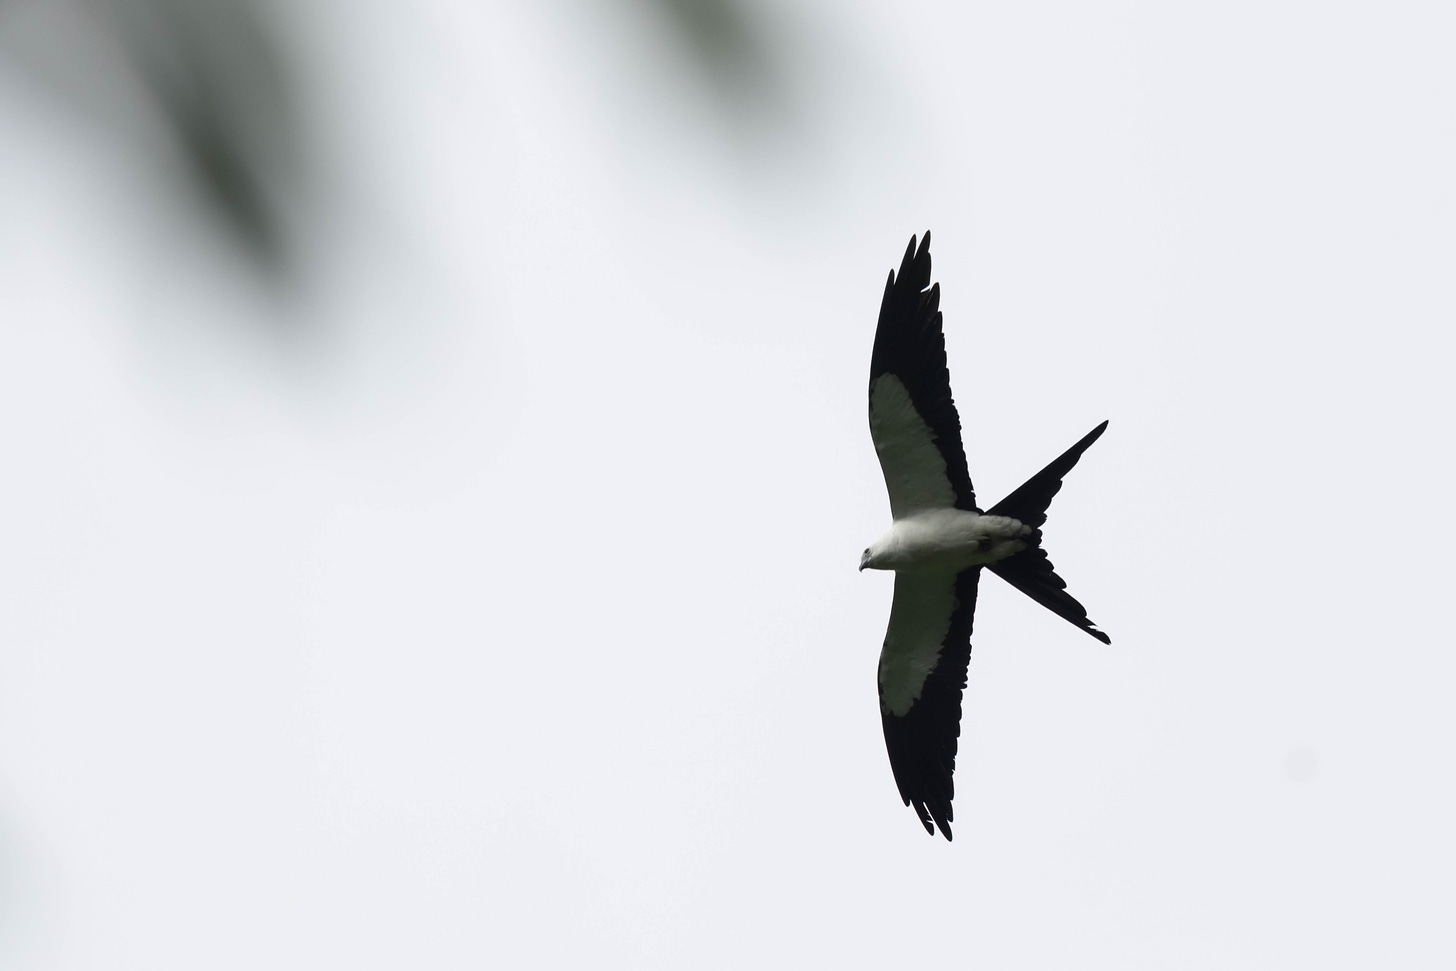 a white raptor with thin, long, pointy wings, the tips and trailing edge black, with a black tail deeply forked like a swallow's, flying left against a white sky